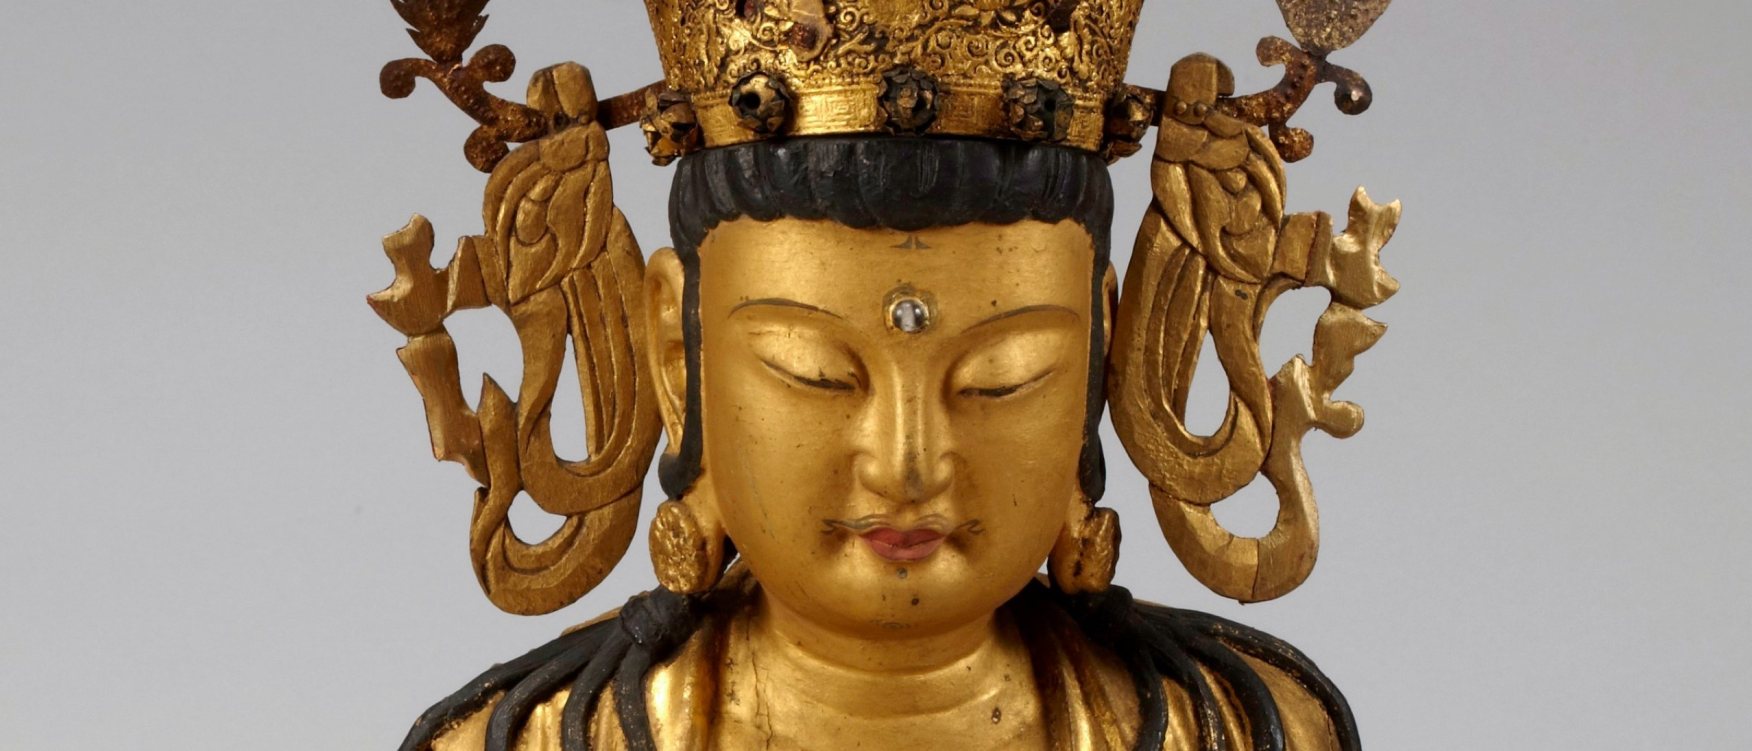 Smithsonian's Freer|Sackler Reveals There Is More Than Meets the Eye When  It Comes to Buddhist Sculpture | Smithsonian Institution